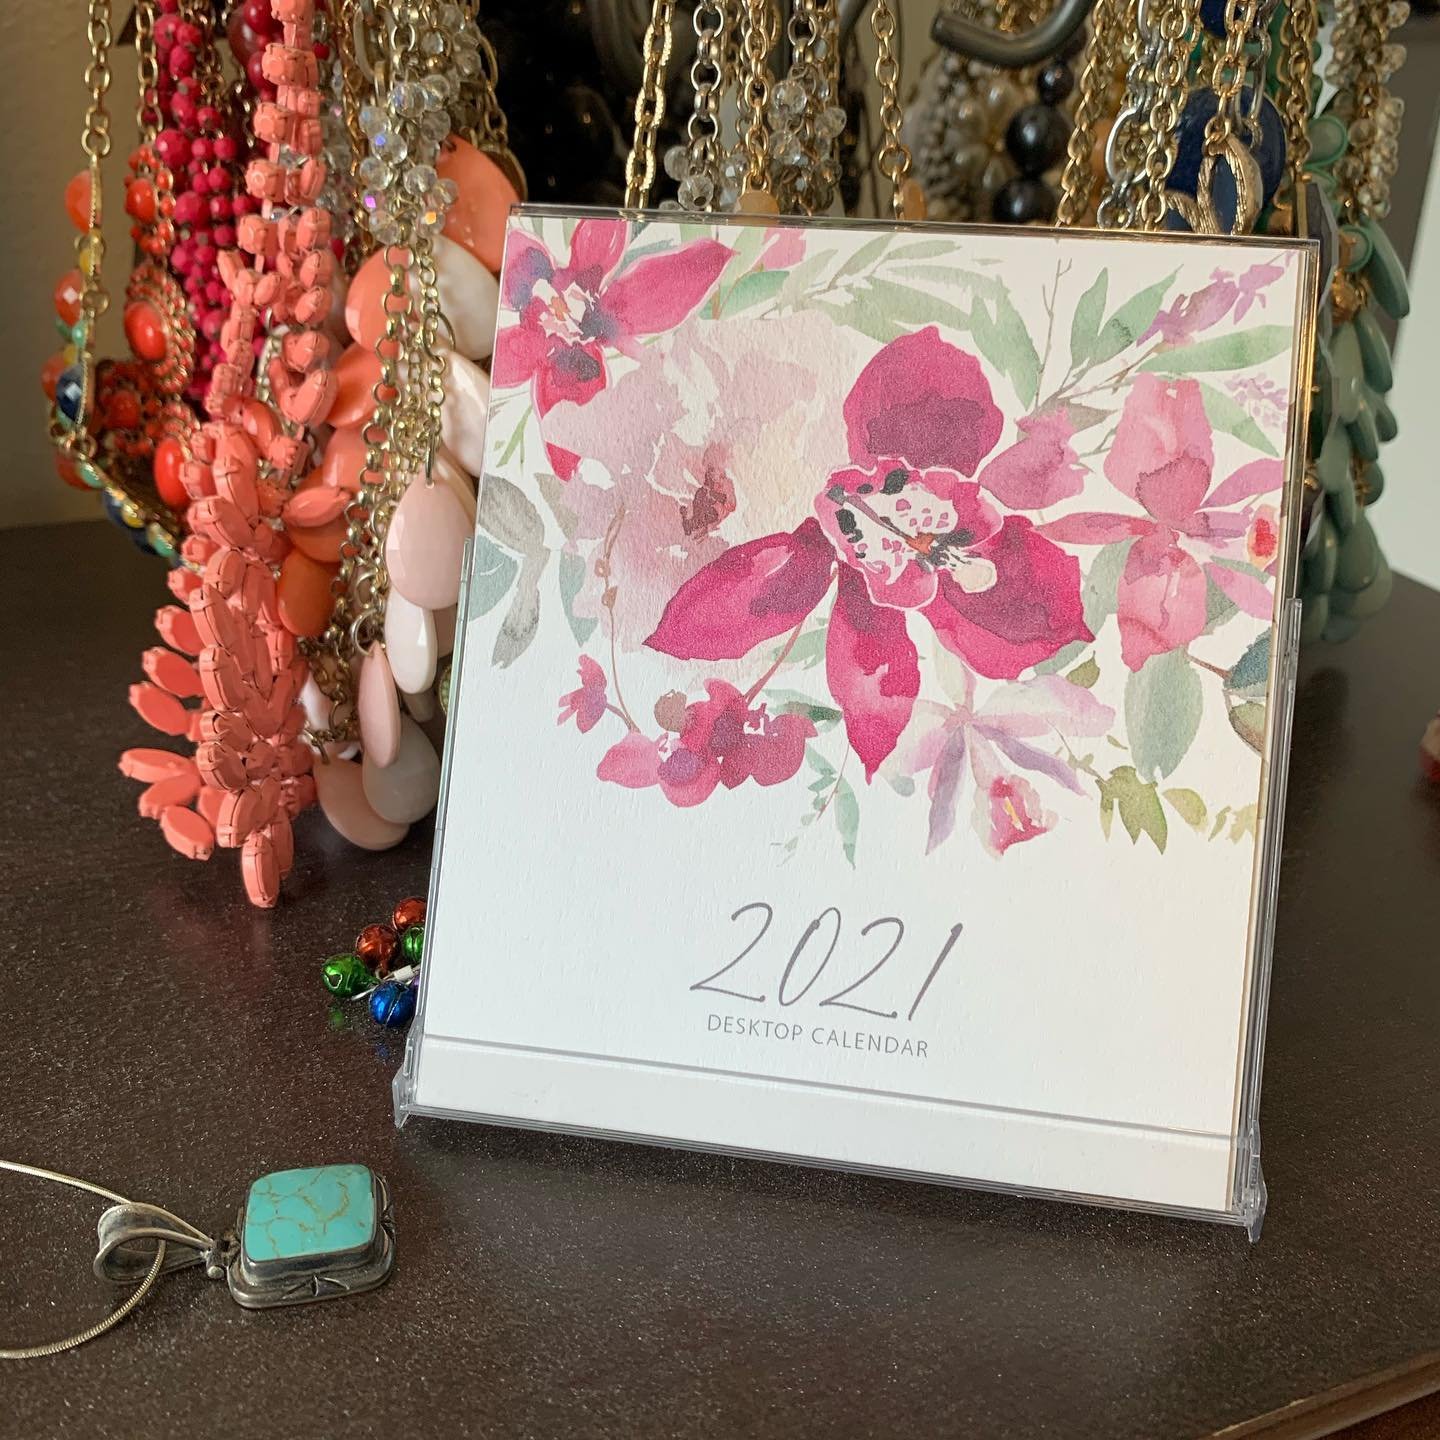 Get you a 2021 Calendar and say goodbye, adios, au revoir, peace out, buh bye to 2020! 👋🏻✌🏻
&bull;
https://etsy.me/34chvnY #desktopcalendar #calendar #etsy #2021caendar #floral #flowers #design #illustration #watercolor #floraldesigns #goodbye2020